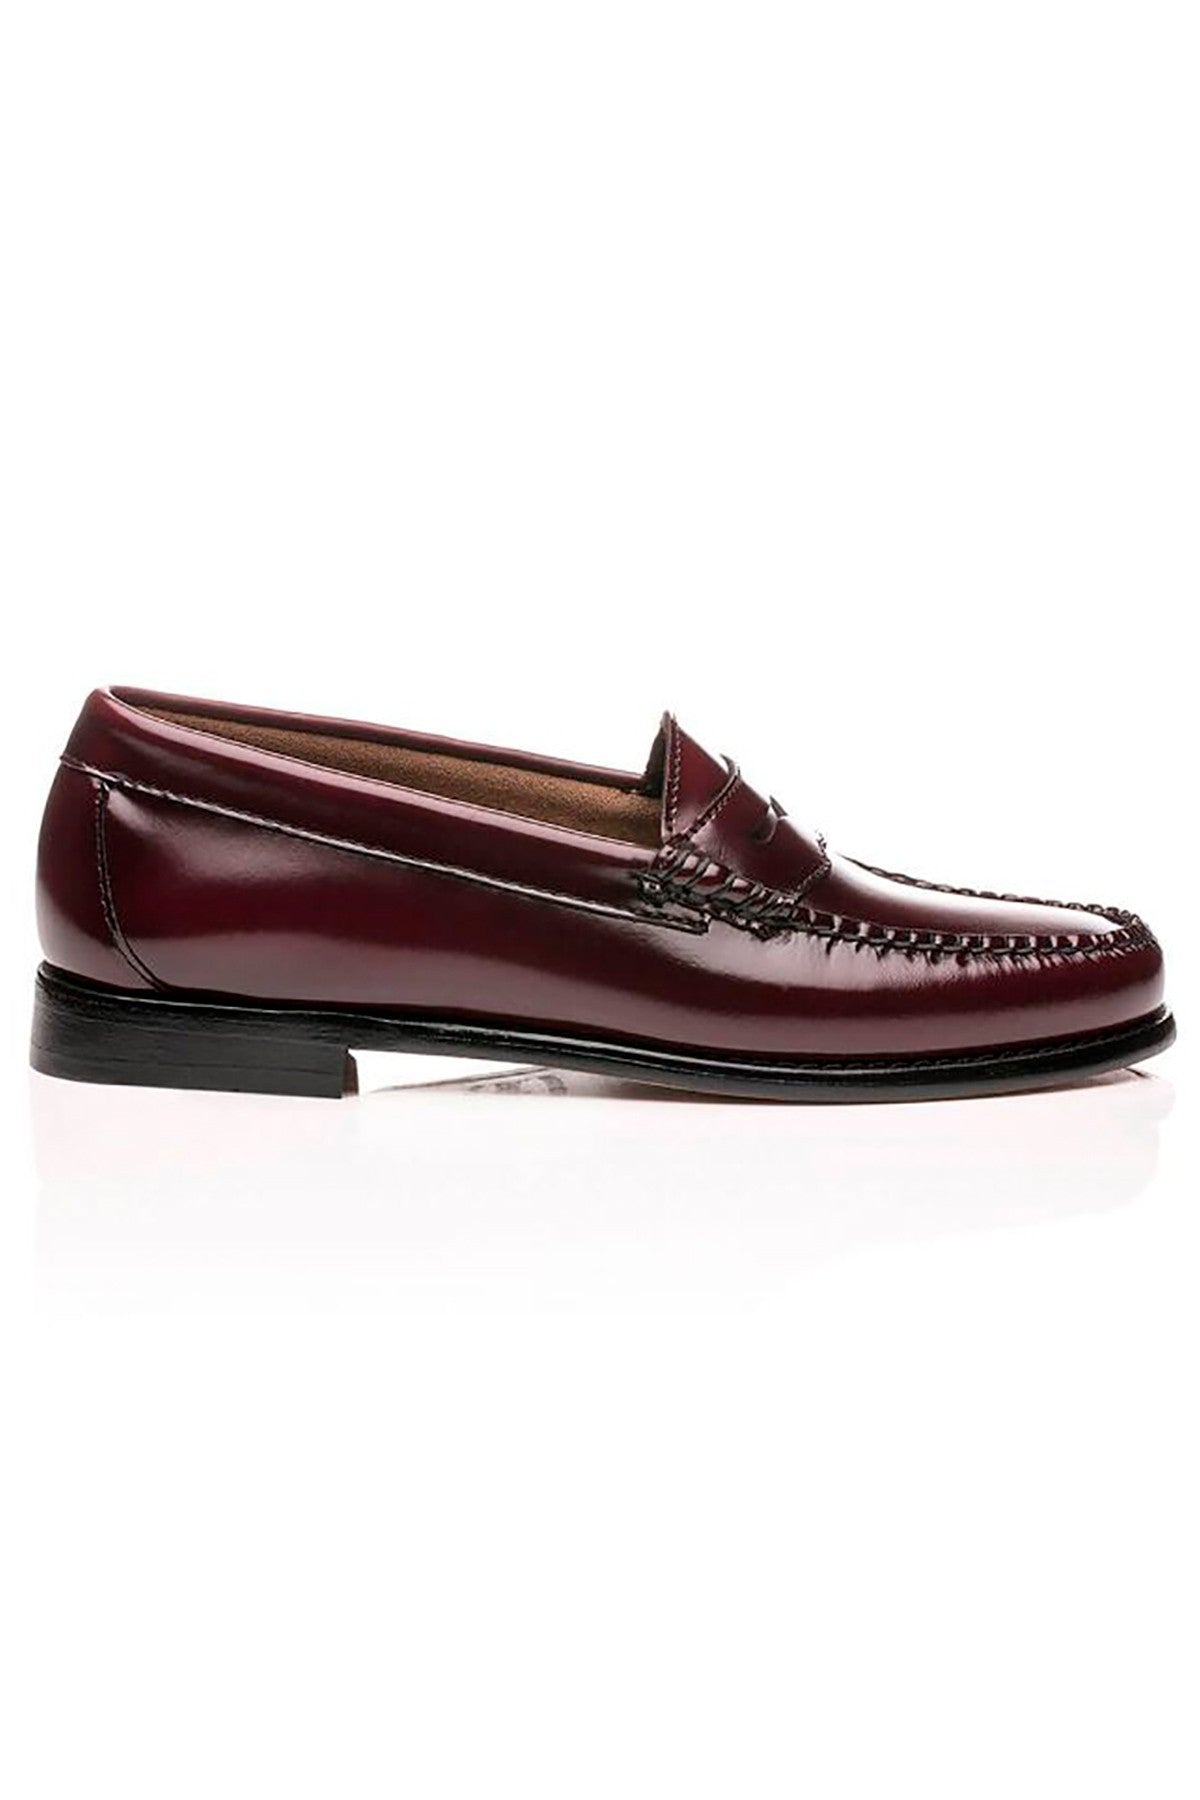 WEEJUN II Penny Shoes - Wine with Rubber Sole